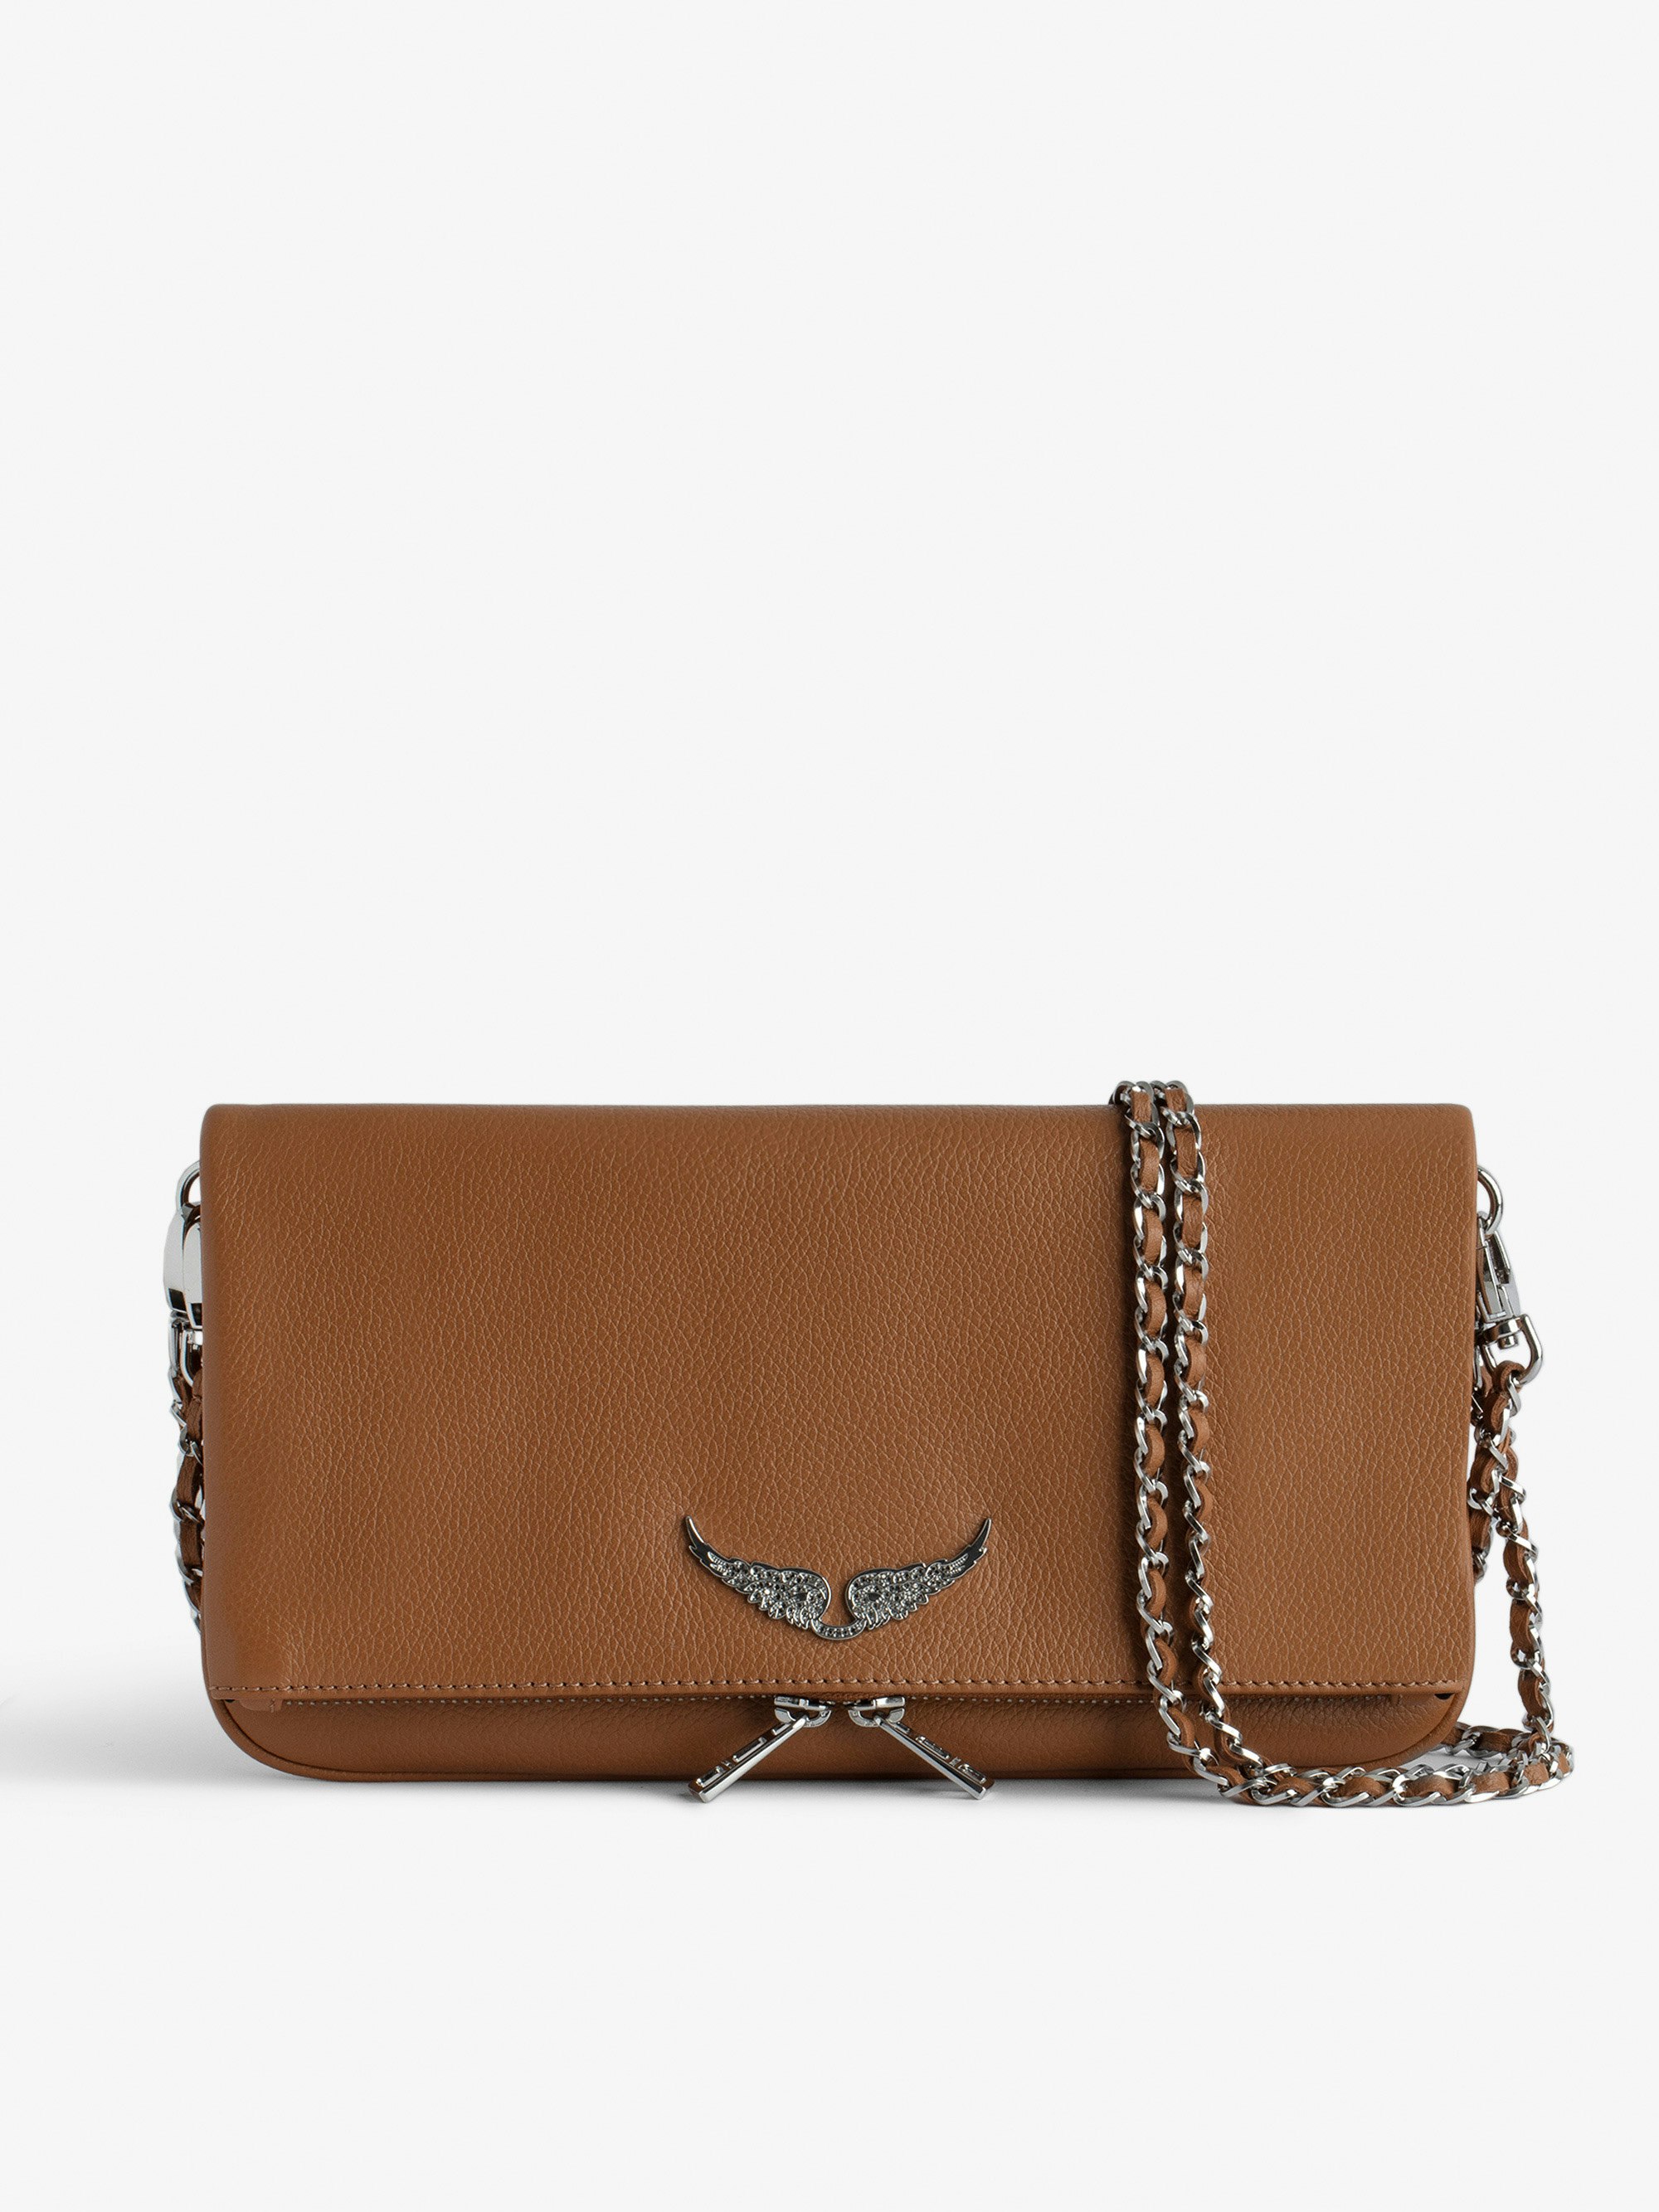 Rock Clutch - Women’s brown grained leather clutch with double leather and metal chain strap.